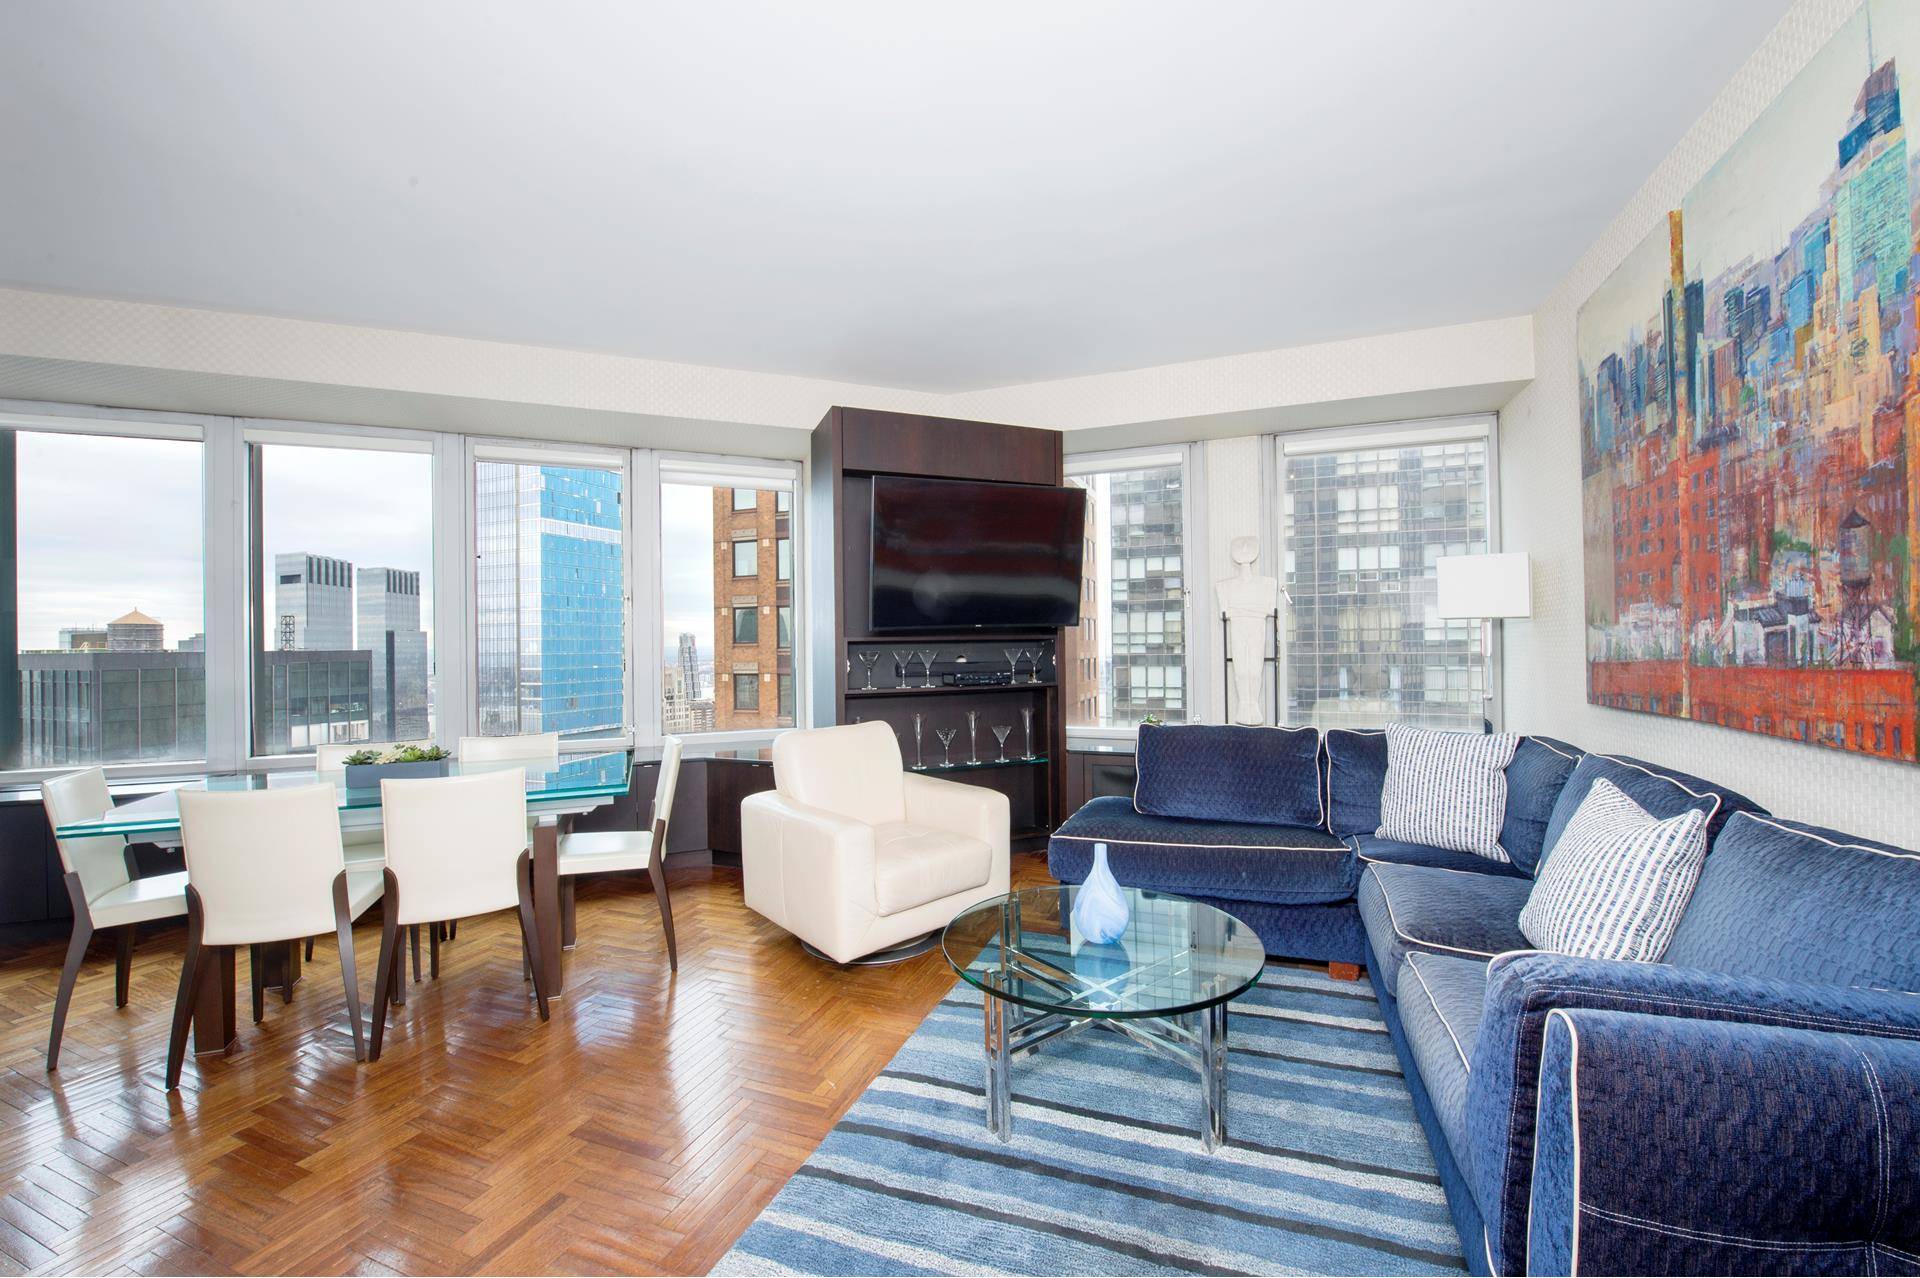 furnished ! ! Live on Billionaires Row, Located in the Heart of Manhattan, next to Carnegie Hall steps from Central Park, this beautiful apt.